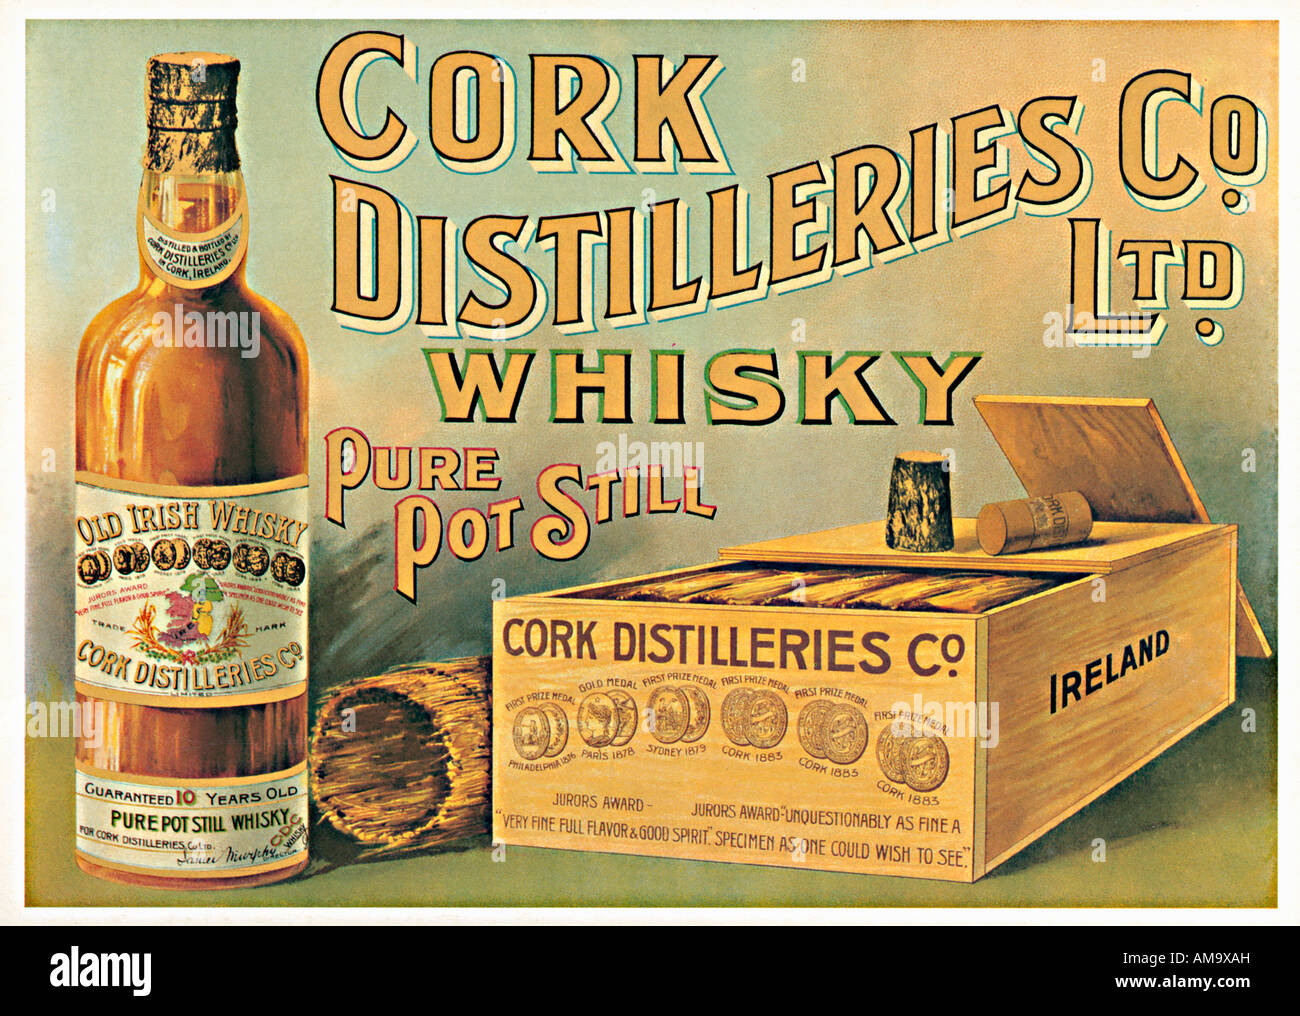 Cork Distilleries Whisky 1900 poster for the old Irish Pure Pot Still  Whiskey from the Munster City Stock Photo - Alamy